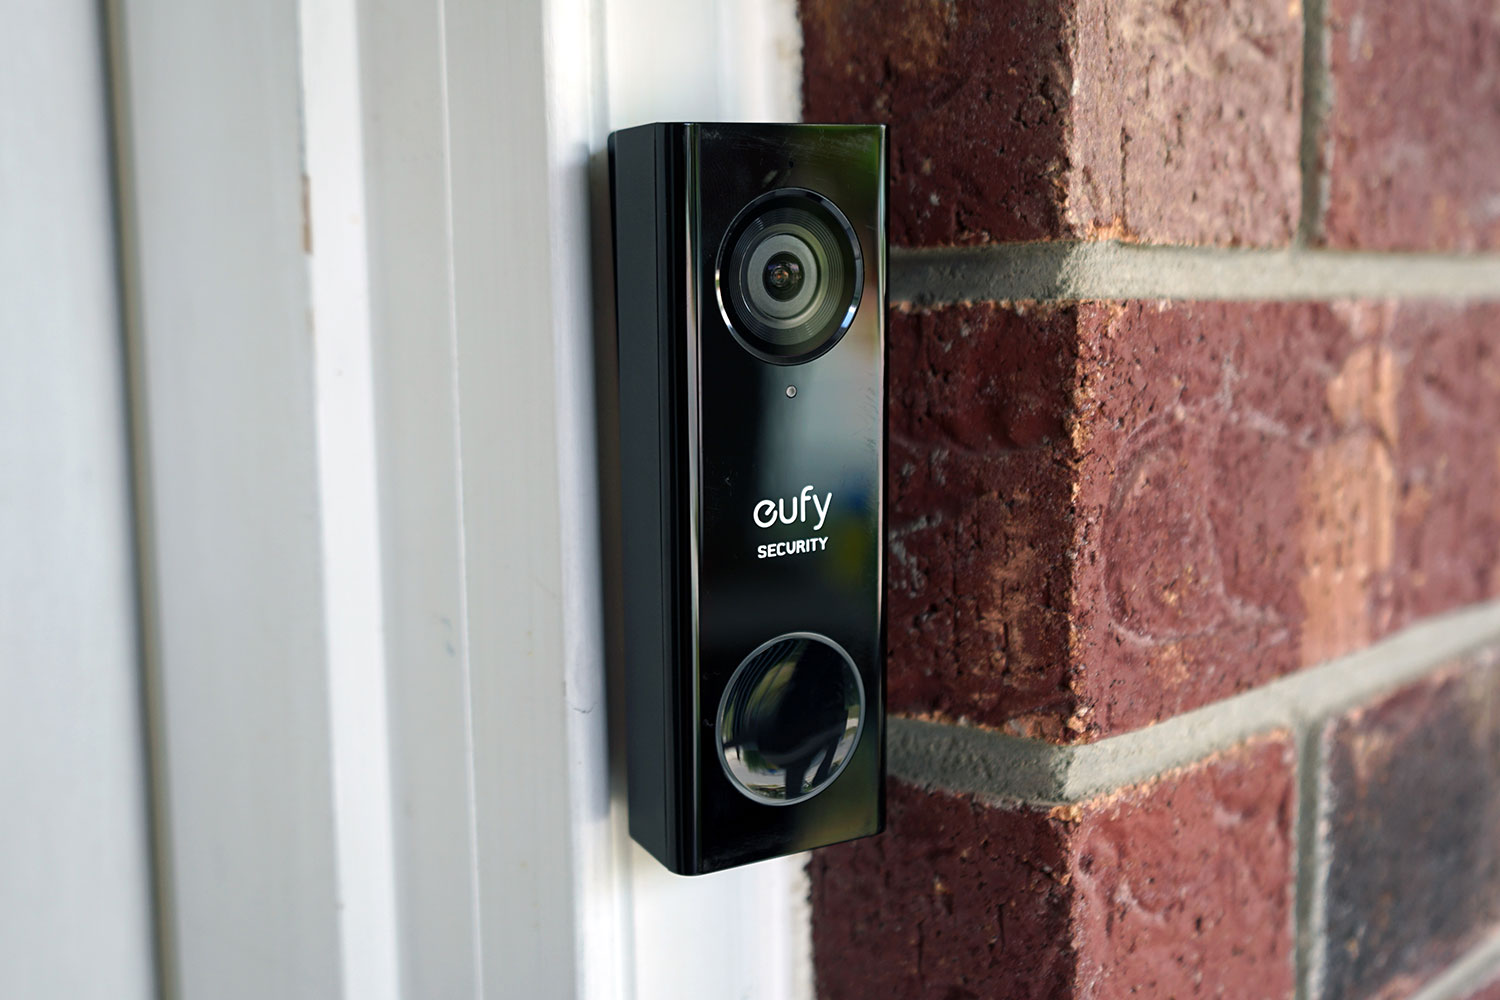 Eufy's Video Doorbell keeps an eye on your porch and your packages